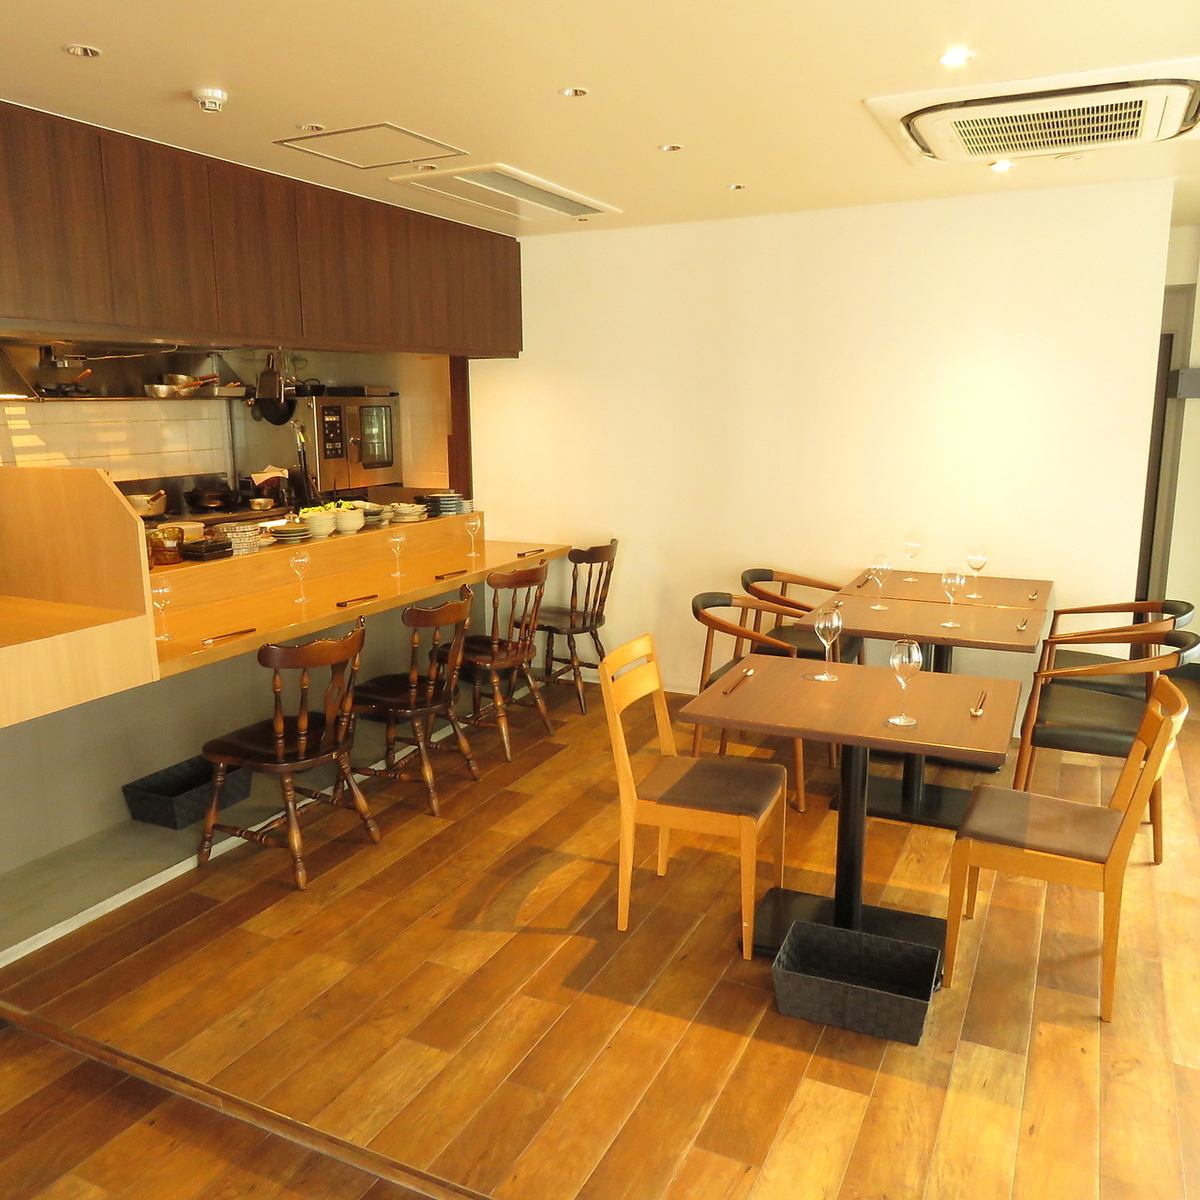 Enjoy the soba, charcoal grill, and sake that you are proud of in a calm atmosphere.